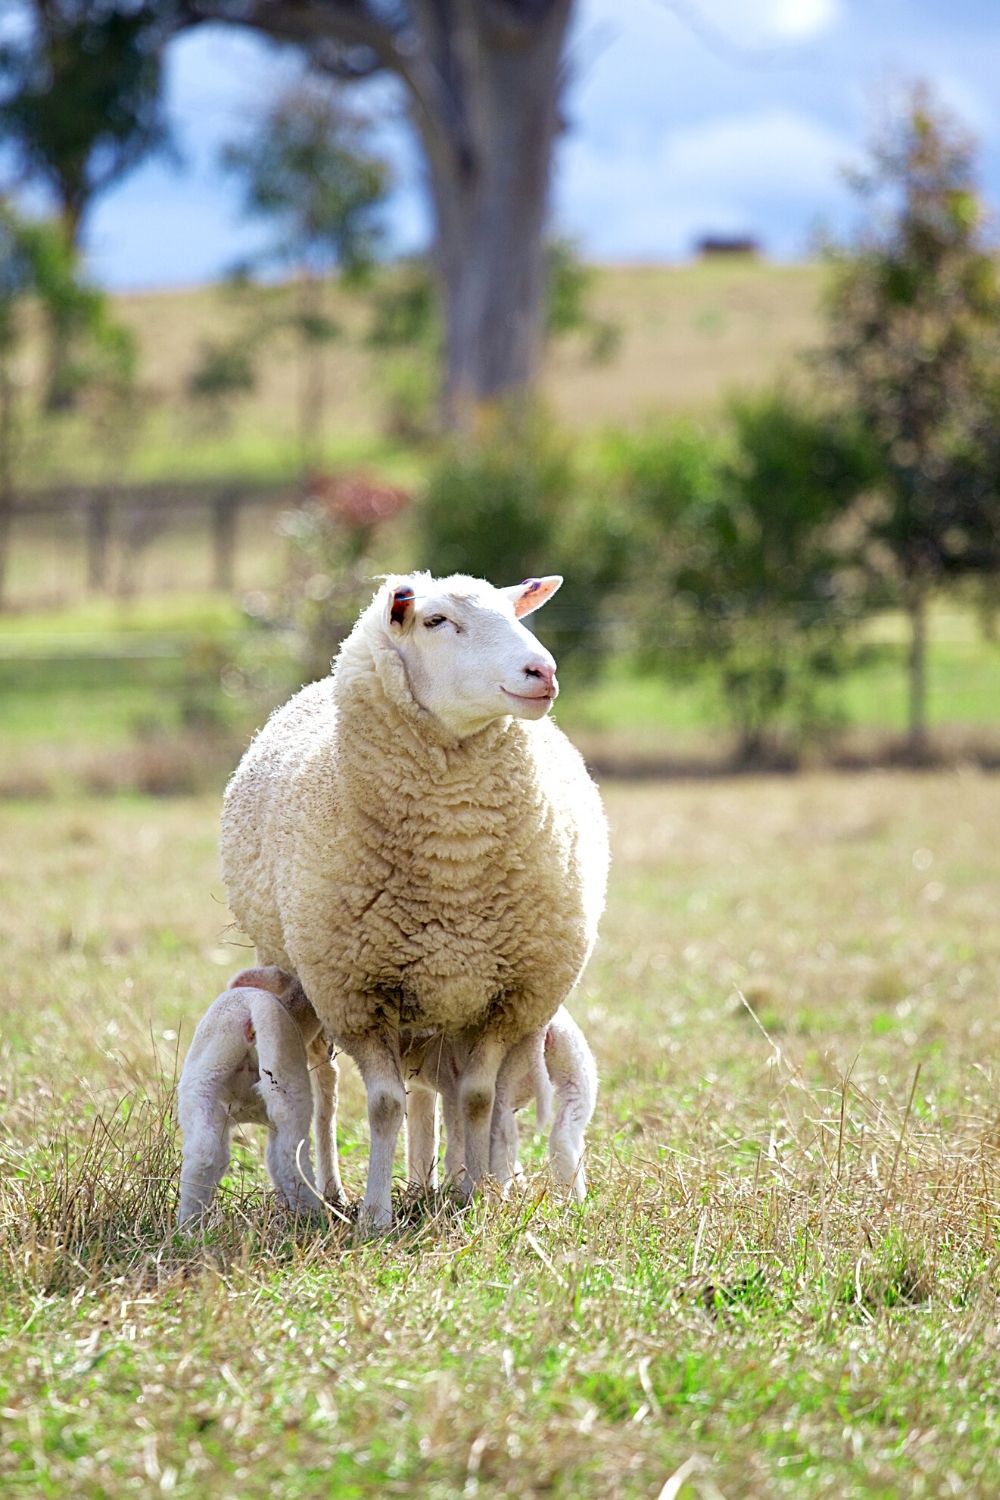 Five feet by five feet is the recommended measurement for lambing jugs where you'll place the baby lamb and the ewe